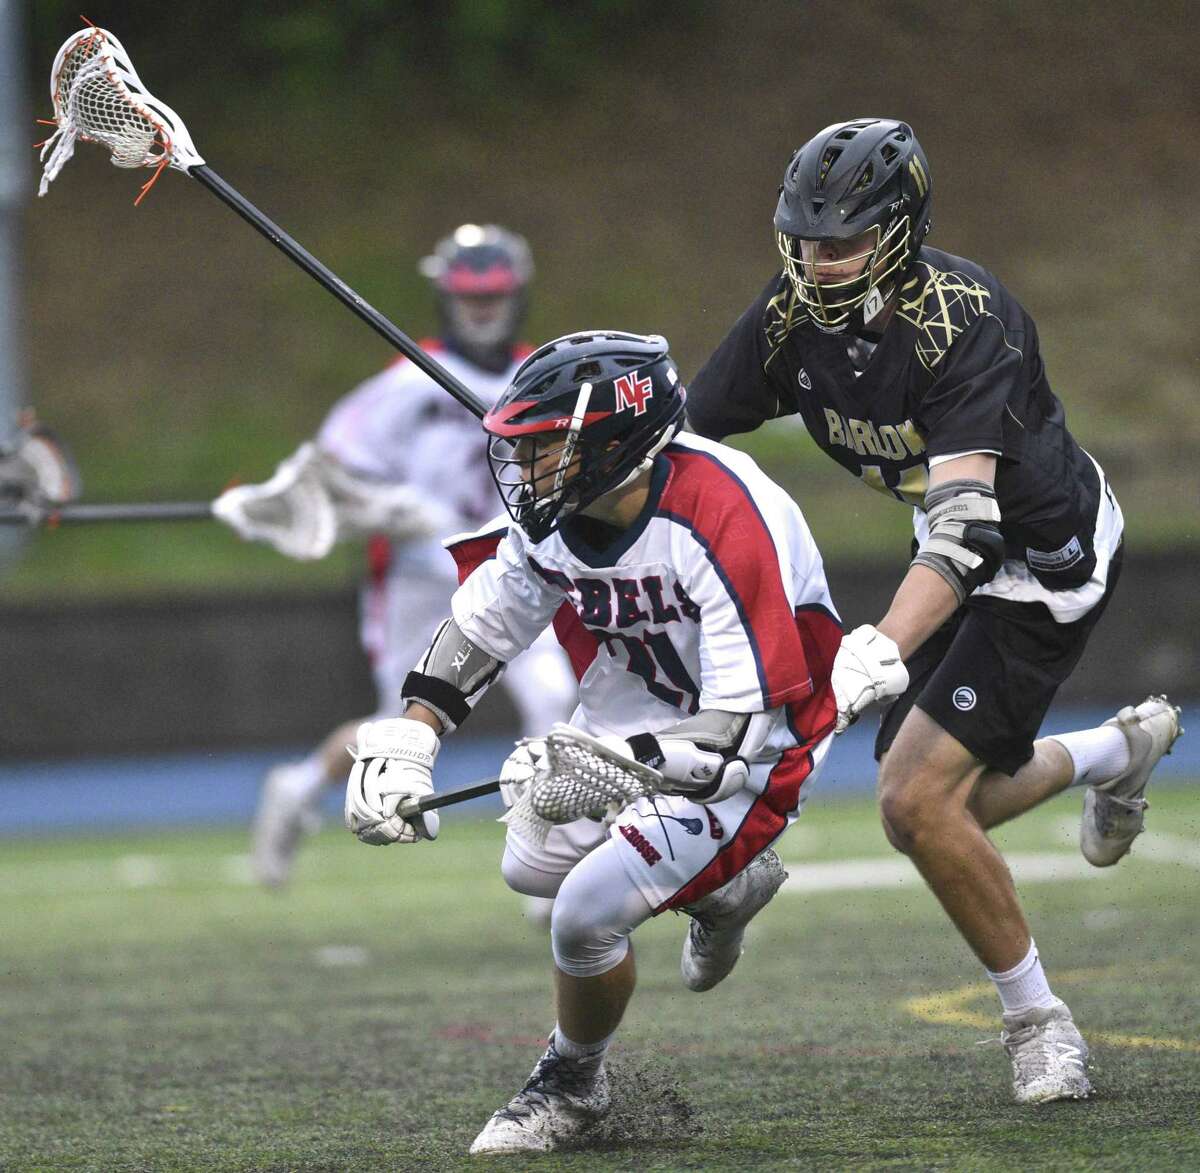 SWC boys lacrosse championship game between Joel Barlow and New Fairfield high schools, on Thursday night, May 25, 2017, at Newtown High School, Newtown, Conn.